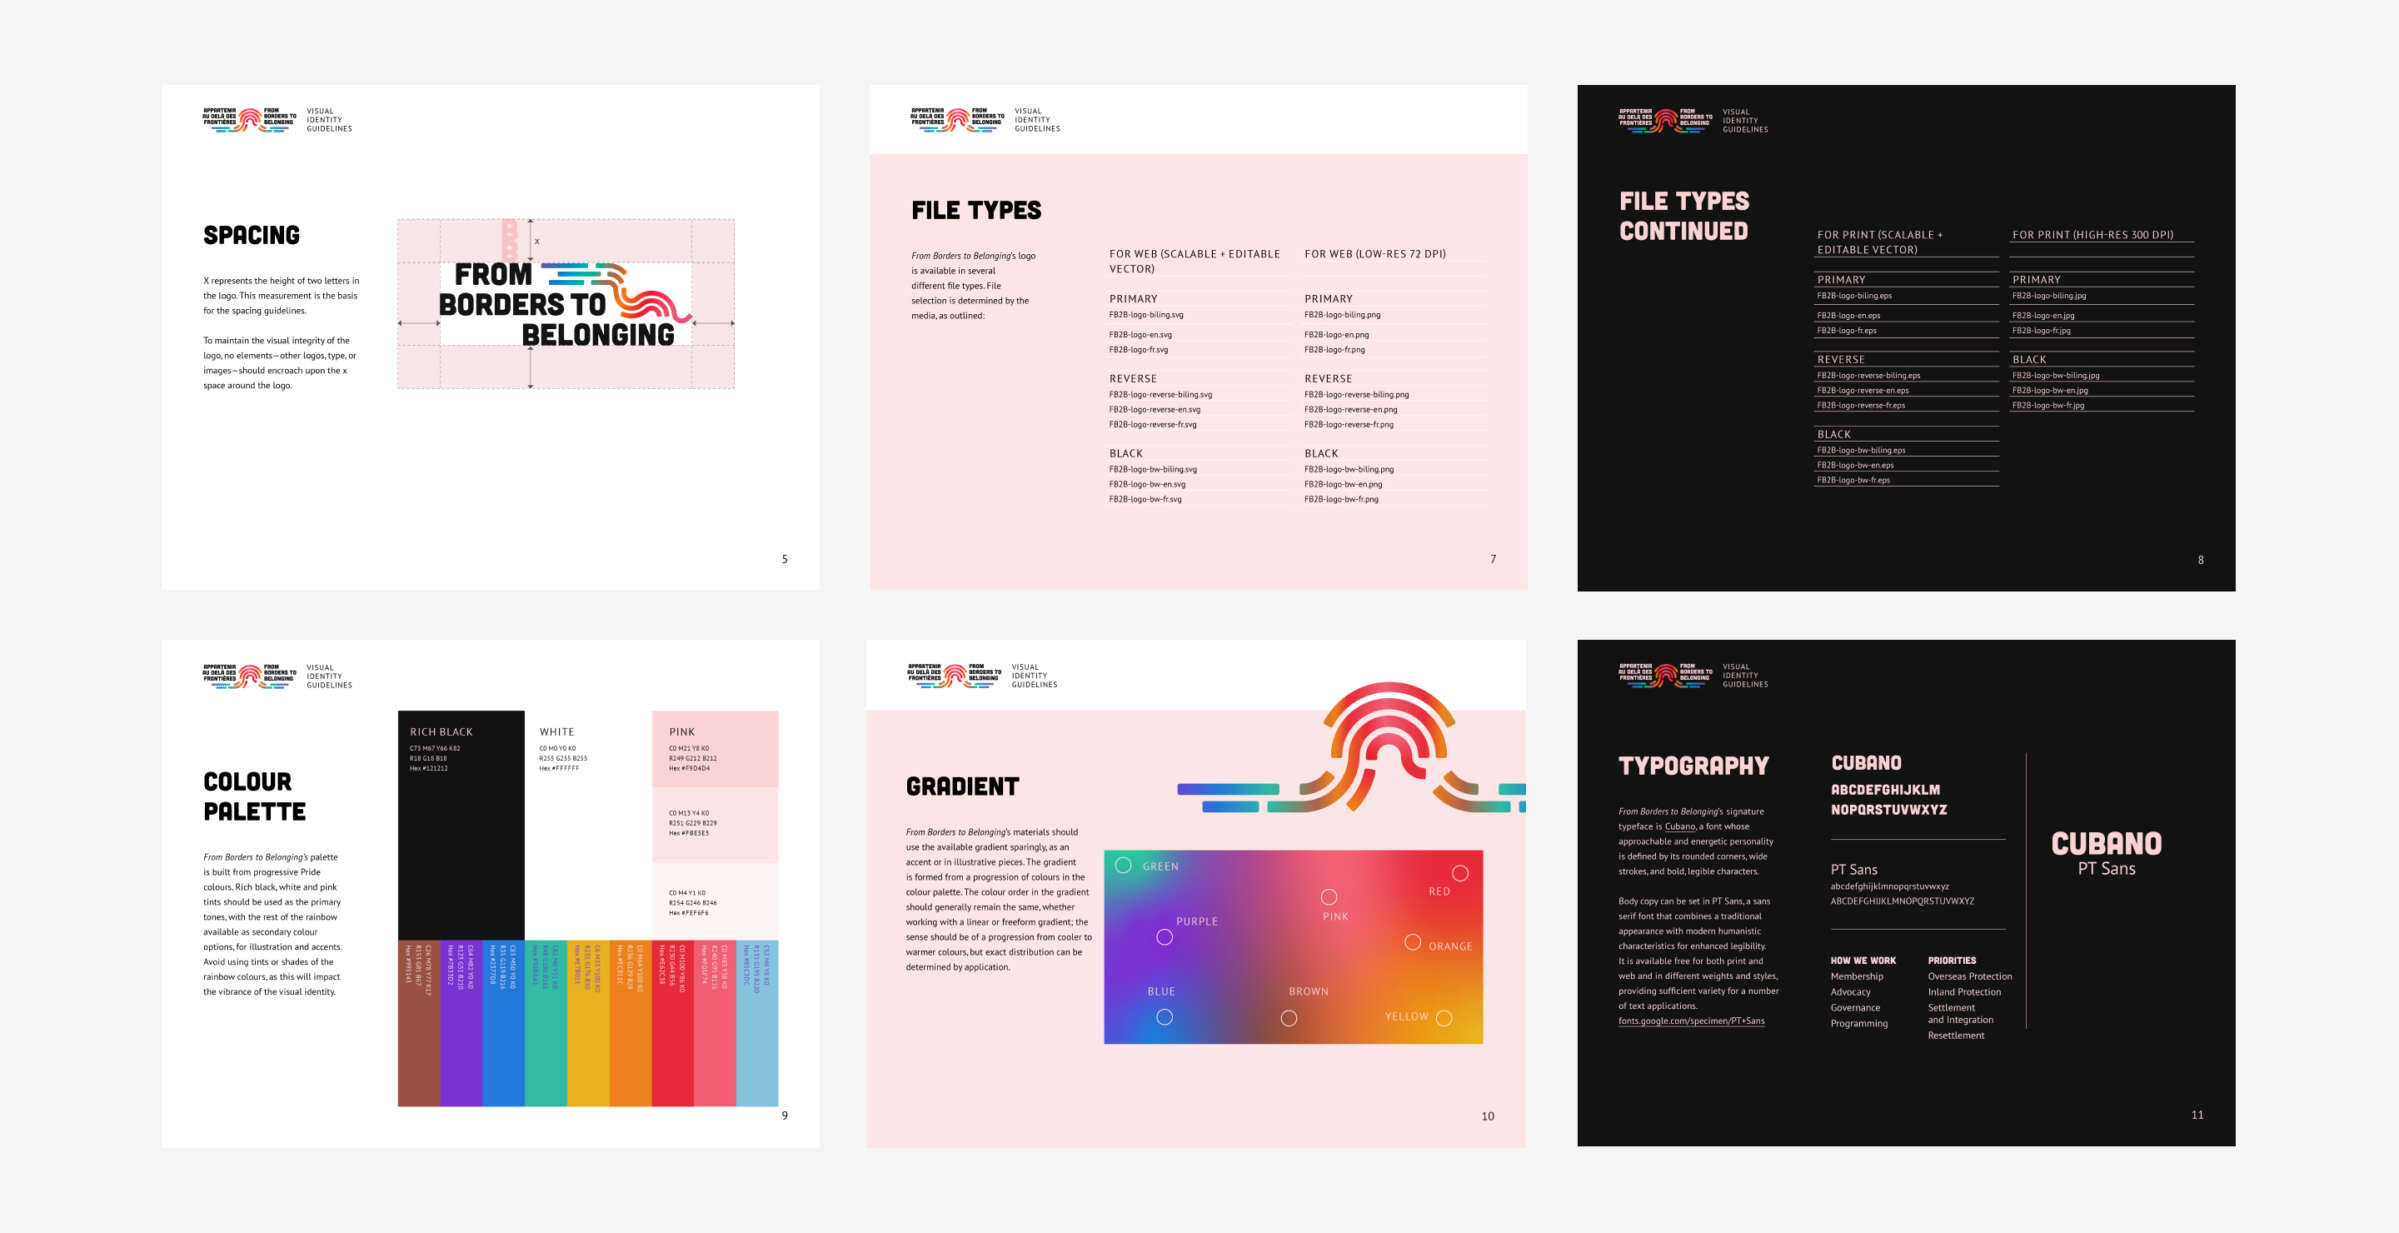 A six-panel image depicts guidelines. Panels include spacing advice, "FROM BORDERS TO BELONGING" text, file types, color palette, gradient info, and typography. Panels are visually designed with graphics, text, and color swatches on white, pink, and black backgrounds.